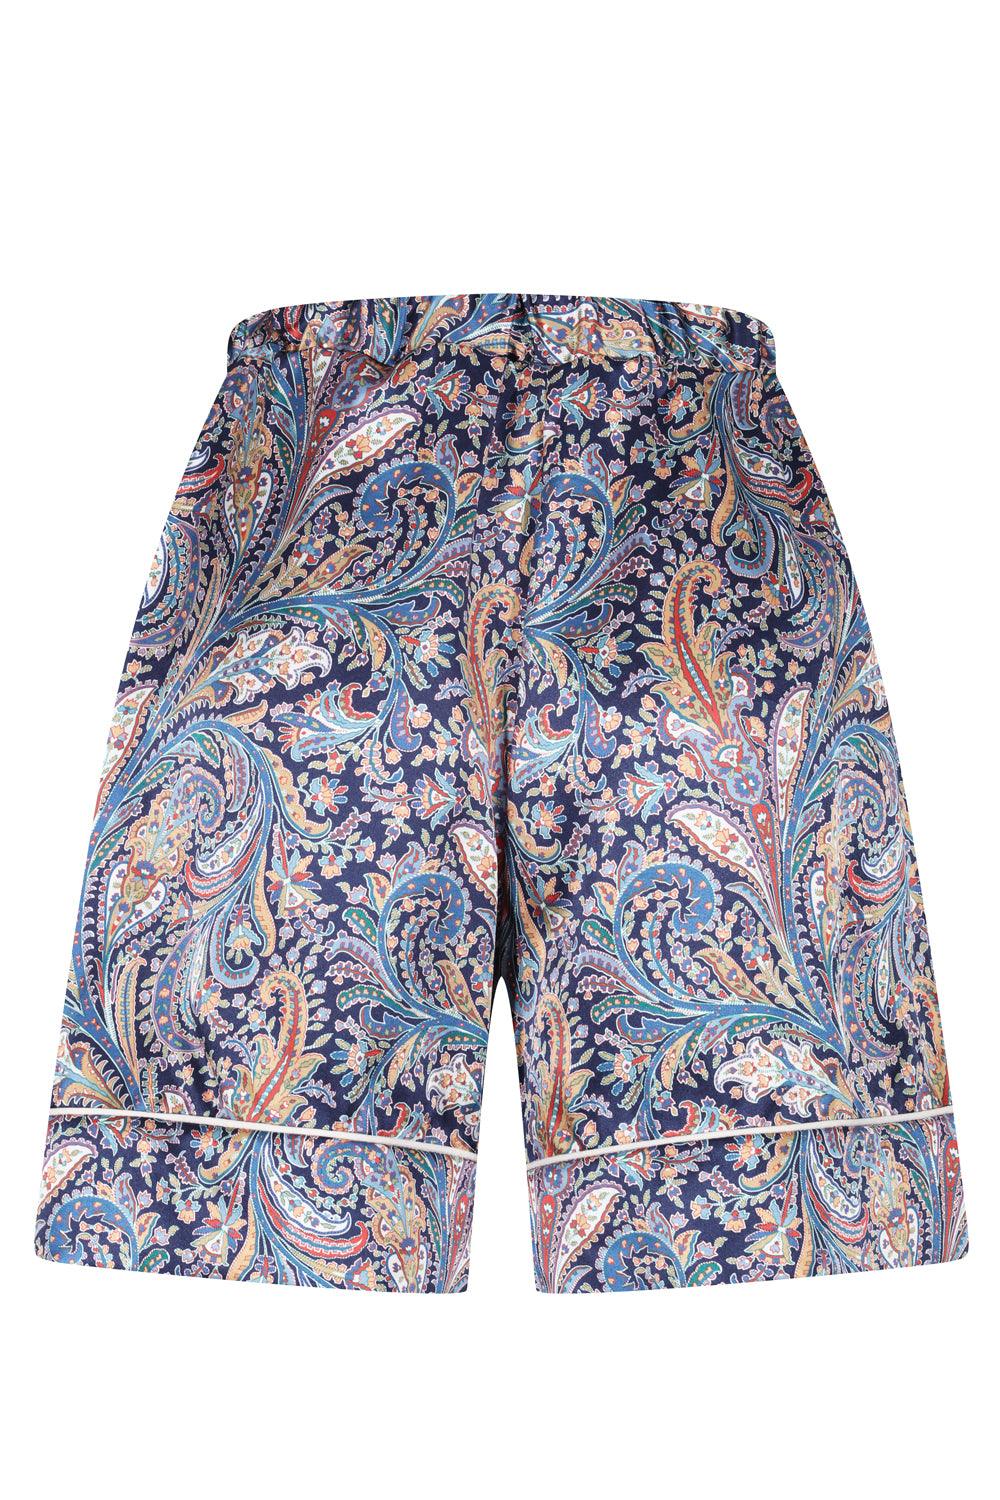 Women's Silk Bed Shorts made with Liberty Fabric GREAT MISSENDEN - Coco & Wolf